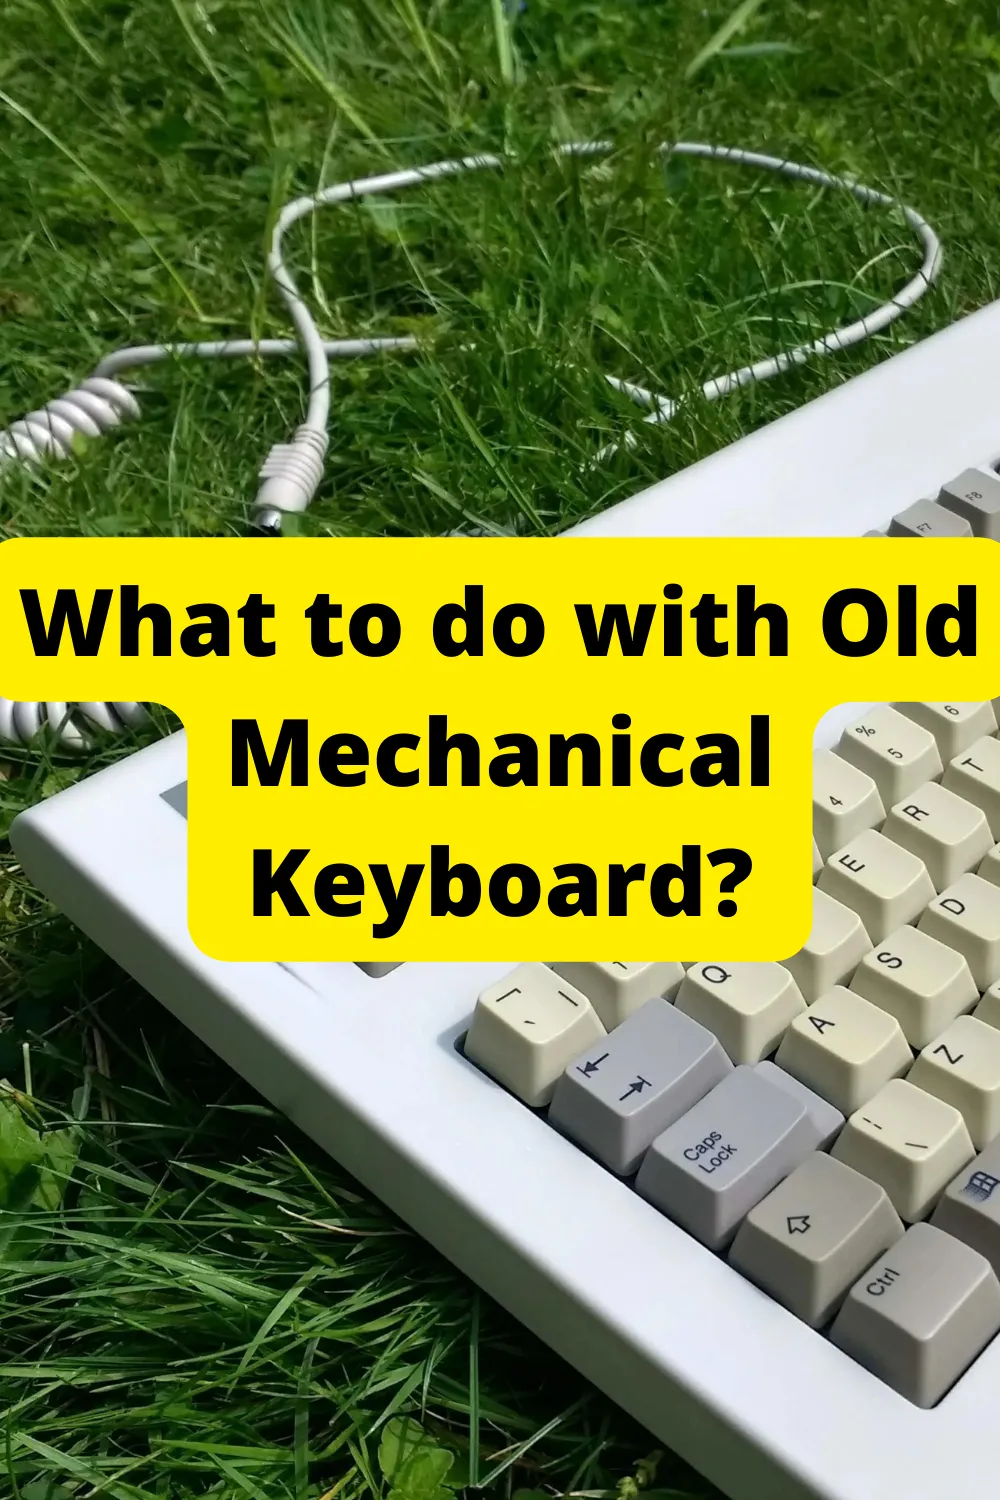 What to do with Old Mechanical Keyboard?